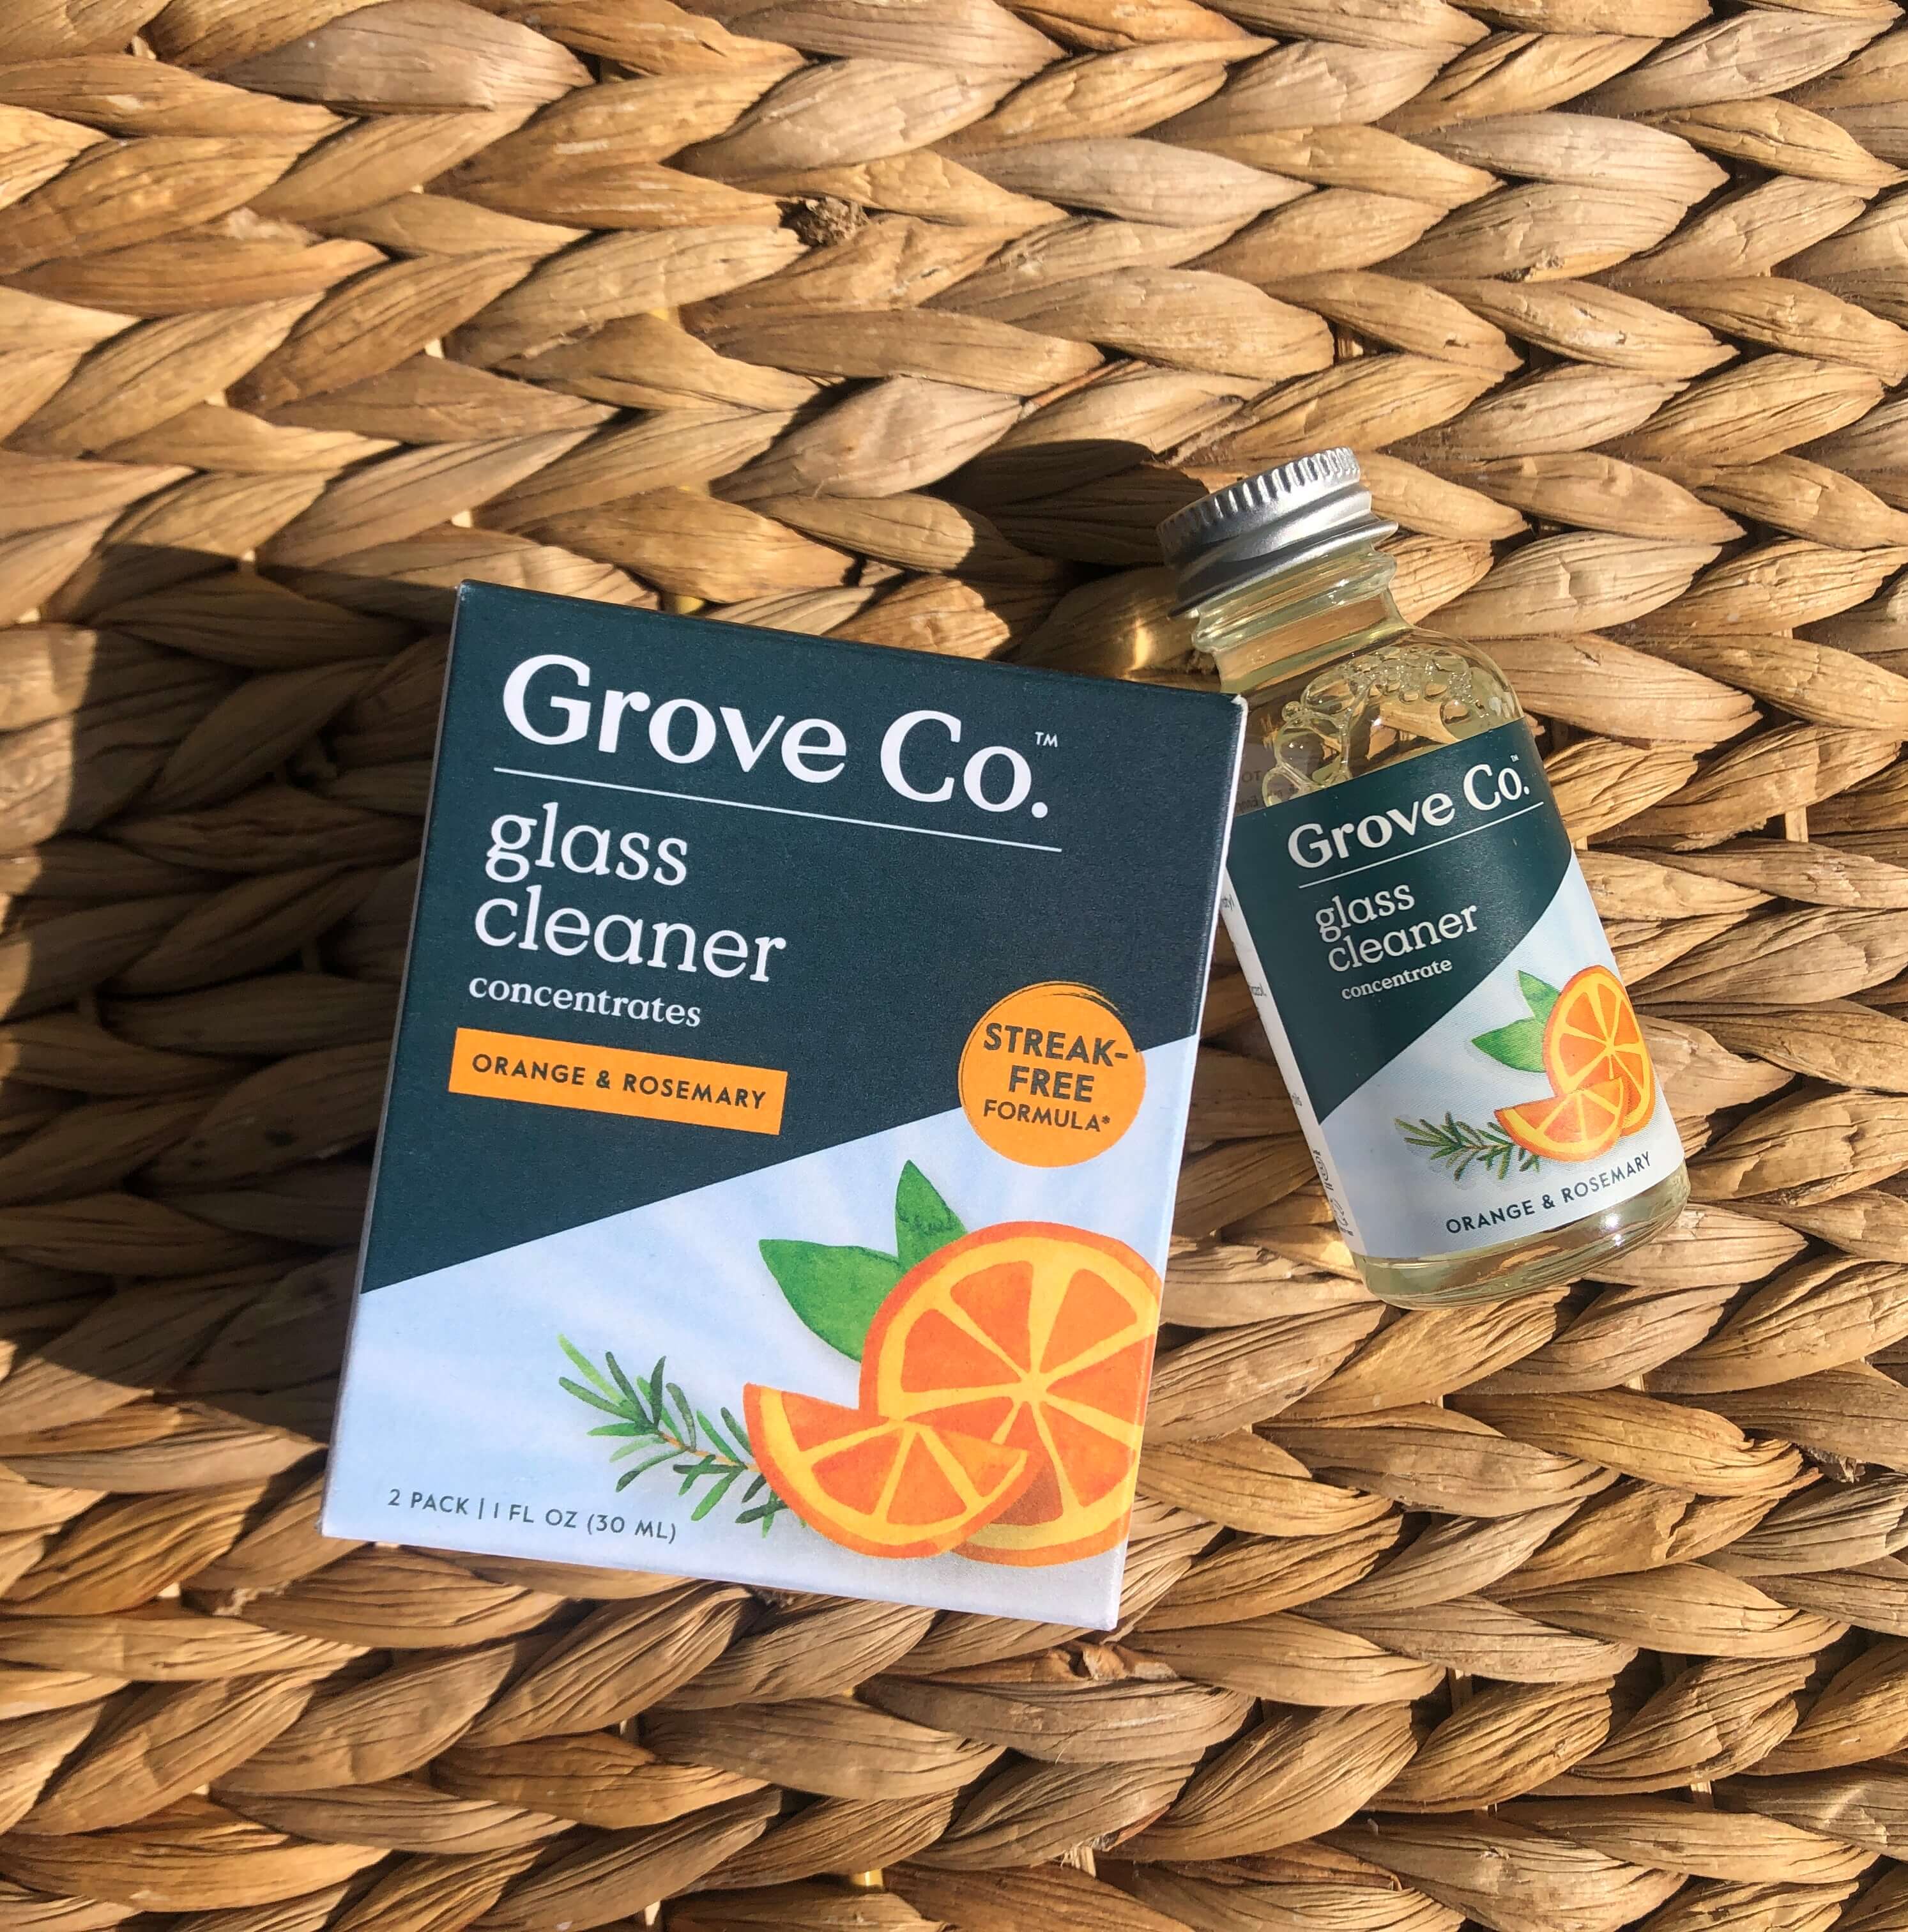 Grove Collaborative glass cleaner for my zero waste cleaning routine